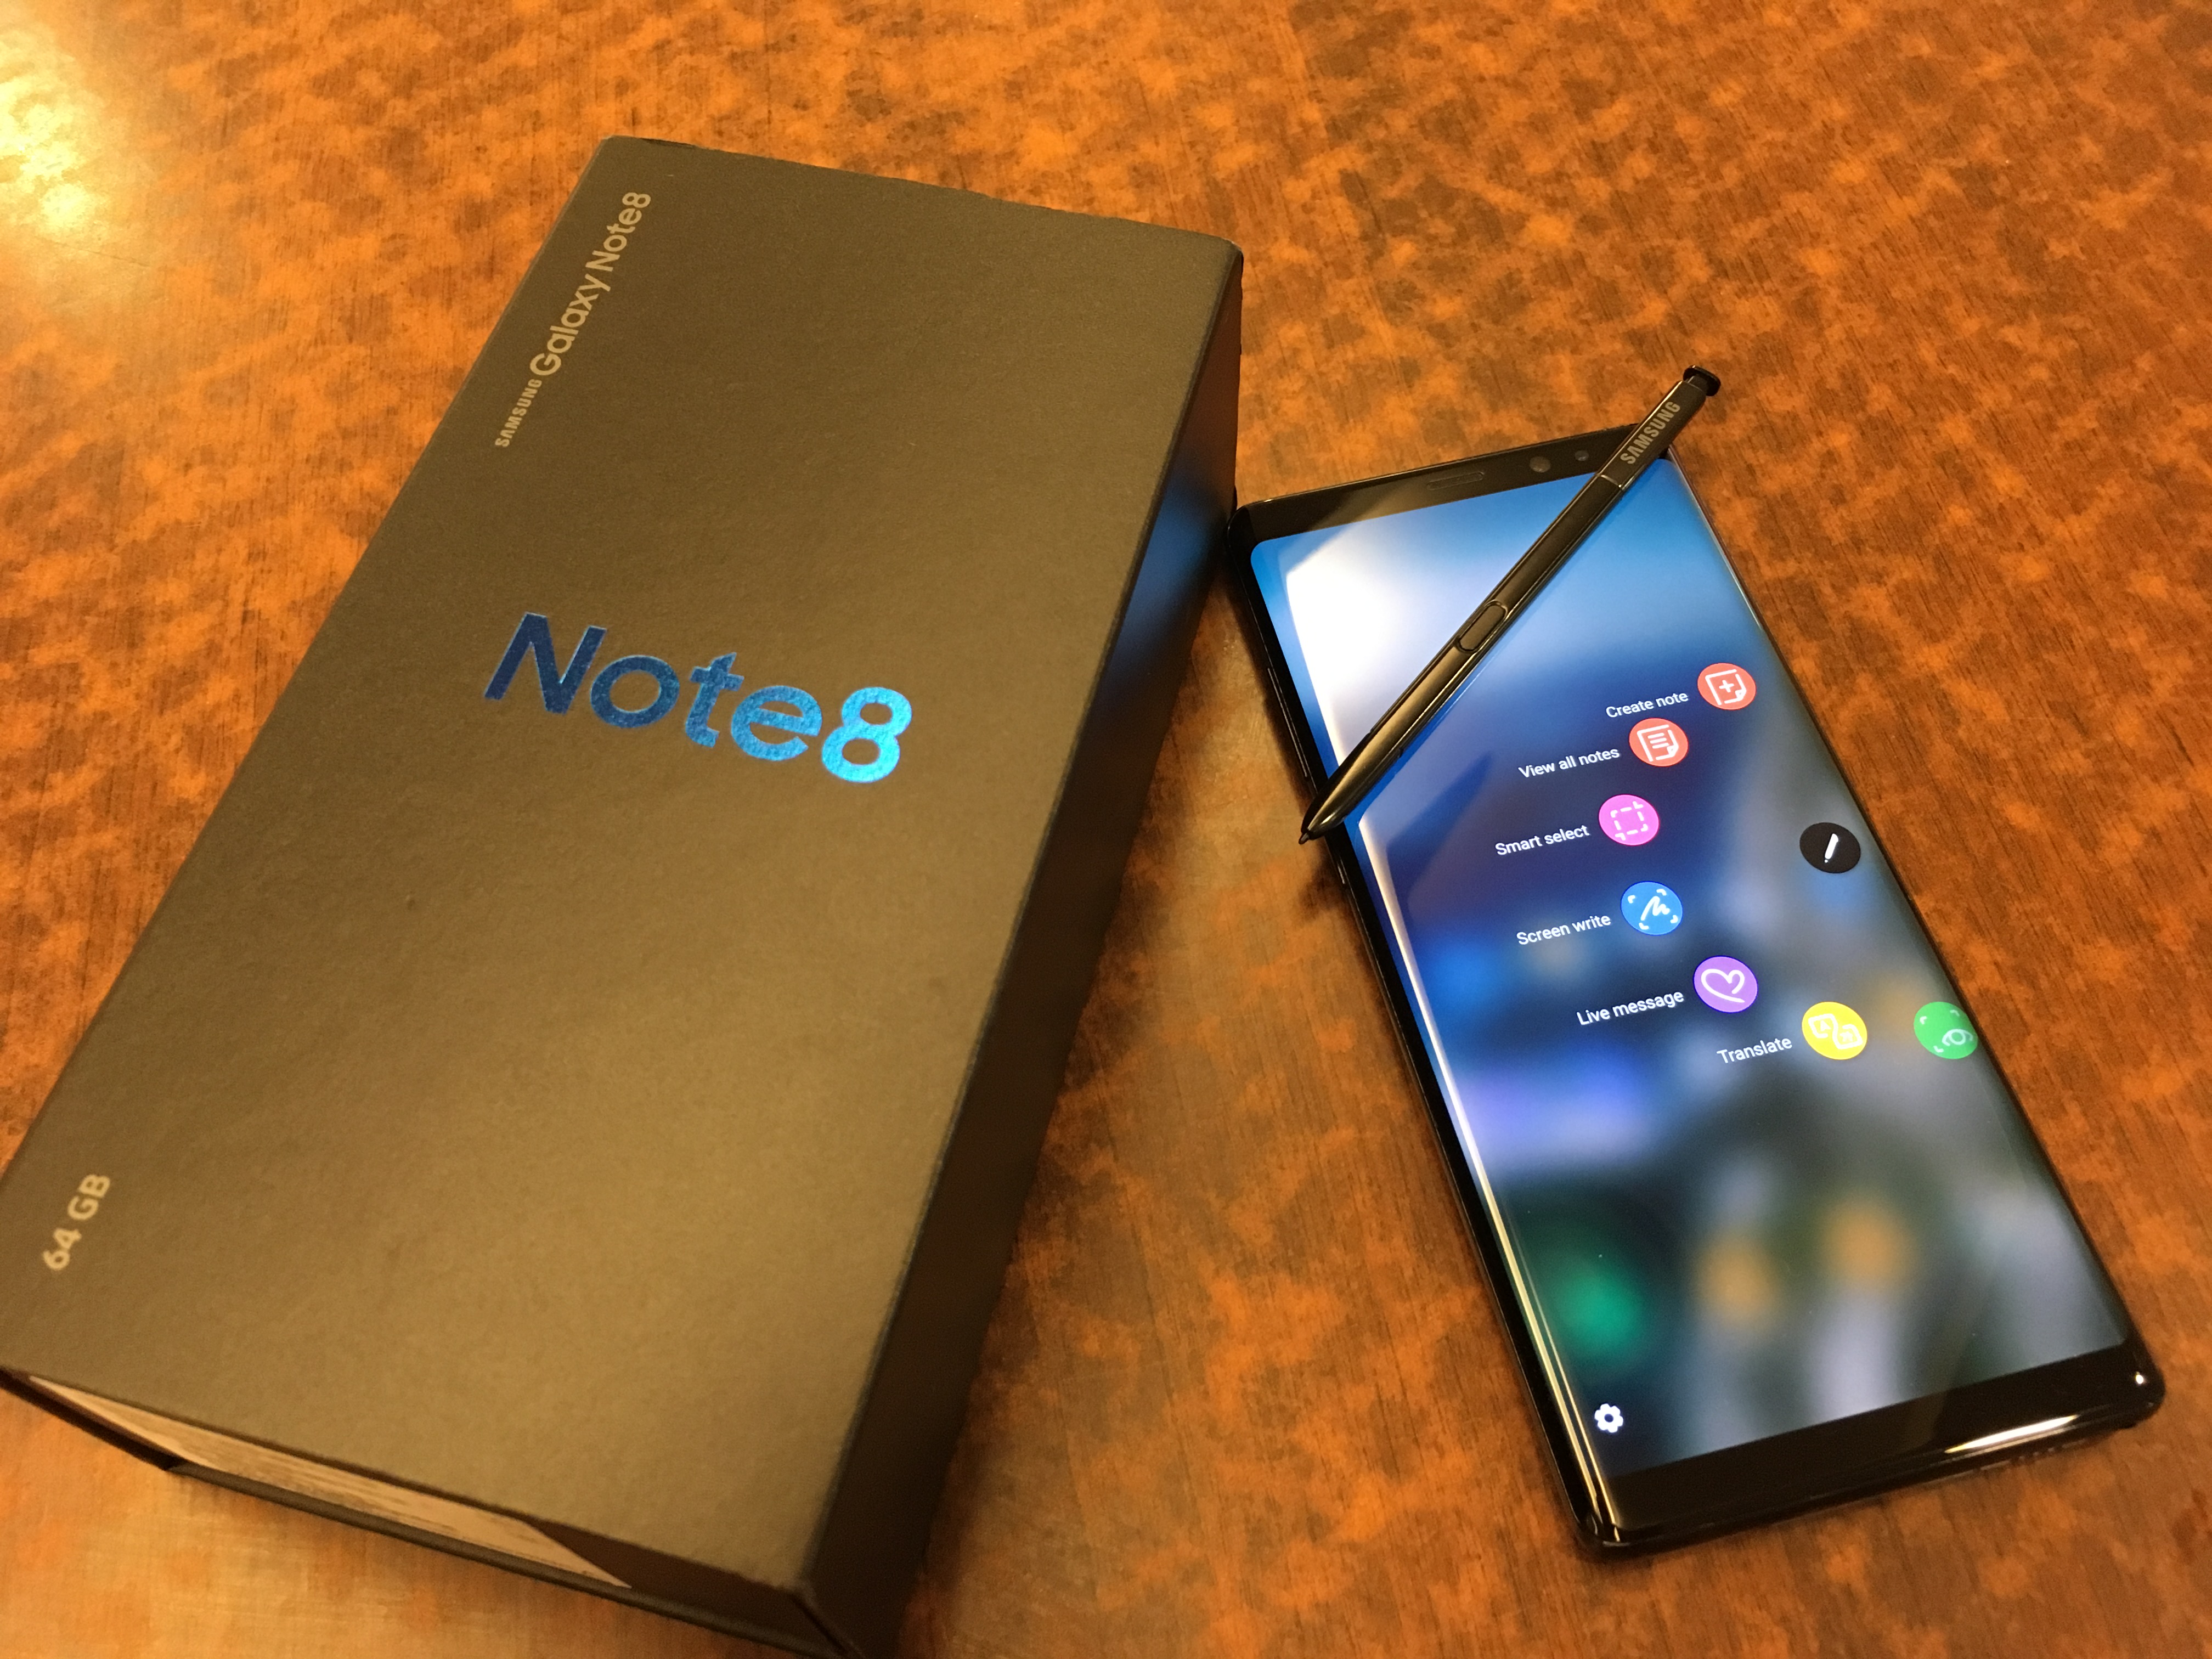 Samsung Galaxy Note 8 review - A noteworthy Samsung Galaxy Note